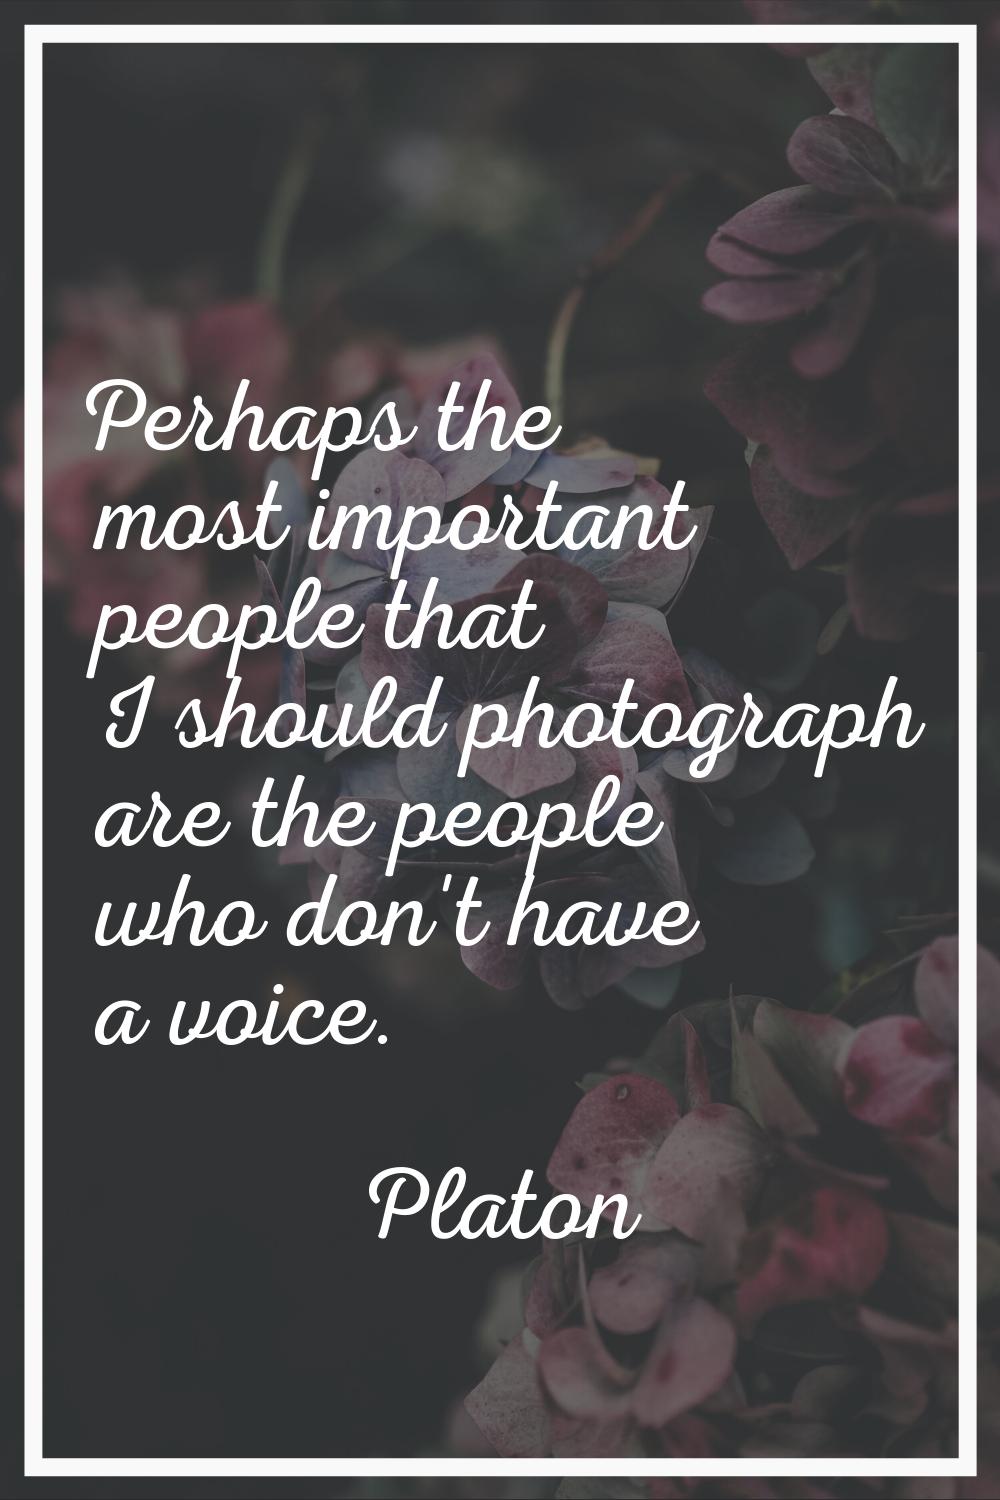 Perhaps the most important people that I should photograph are the people who don't have a voice.